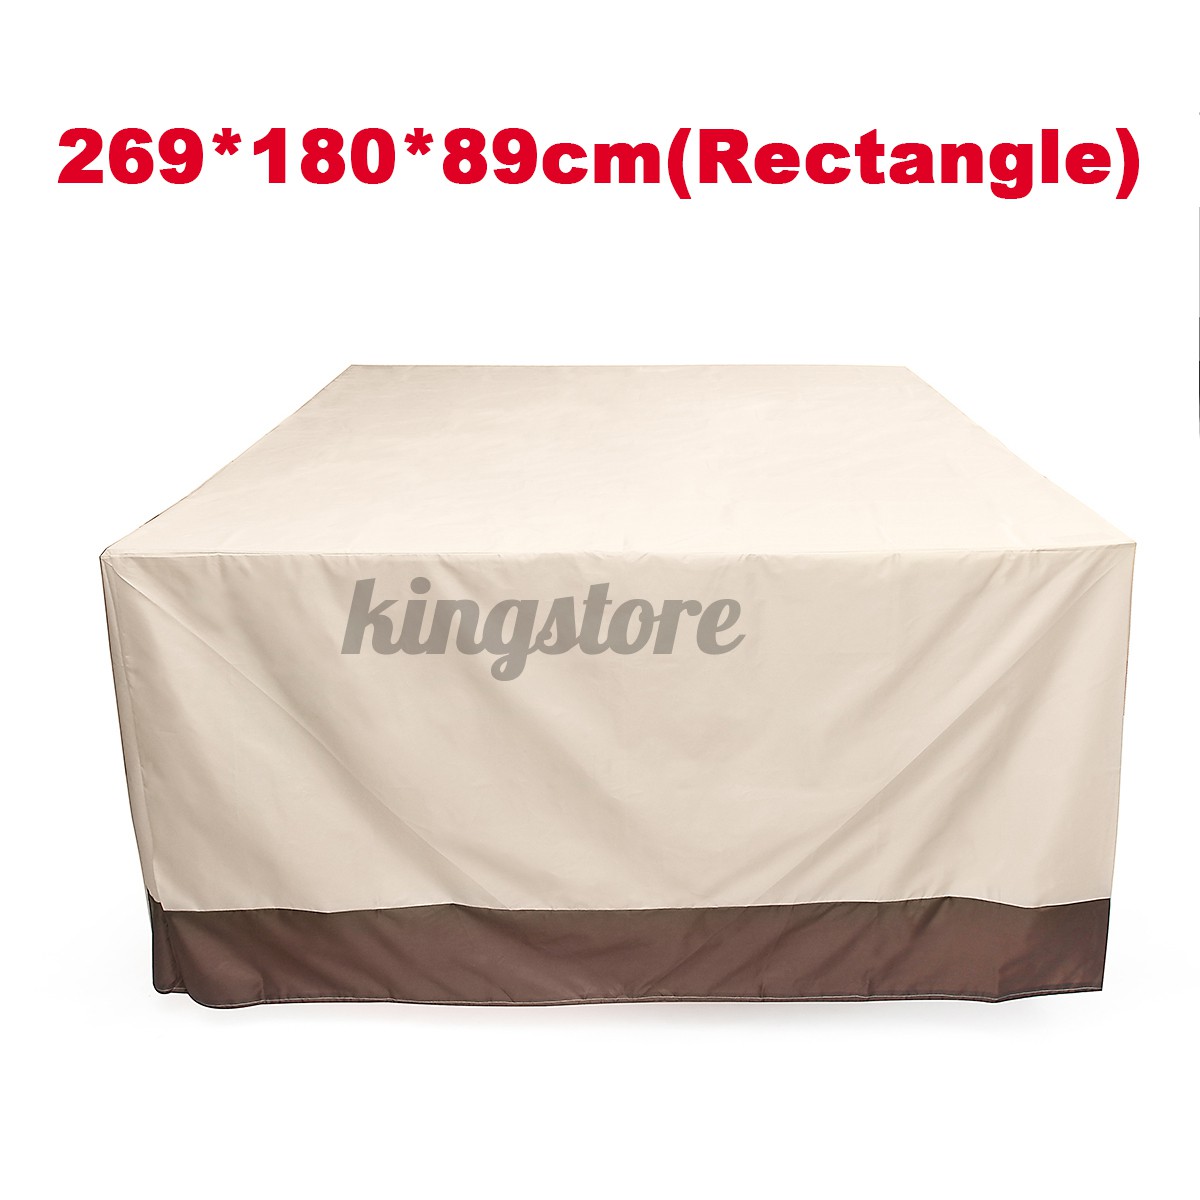 Waterproof Patio Furniture Cover Outdoor Table Chairs Bench Sofa Air Conditioner